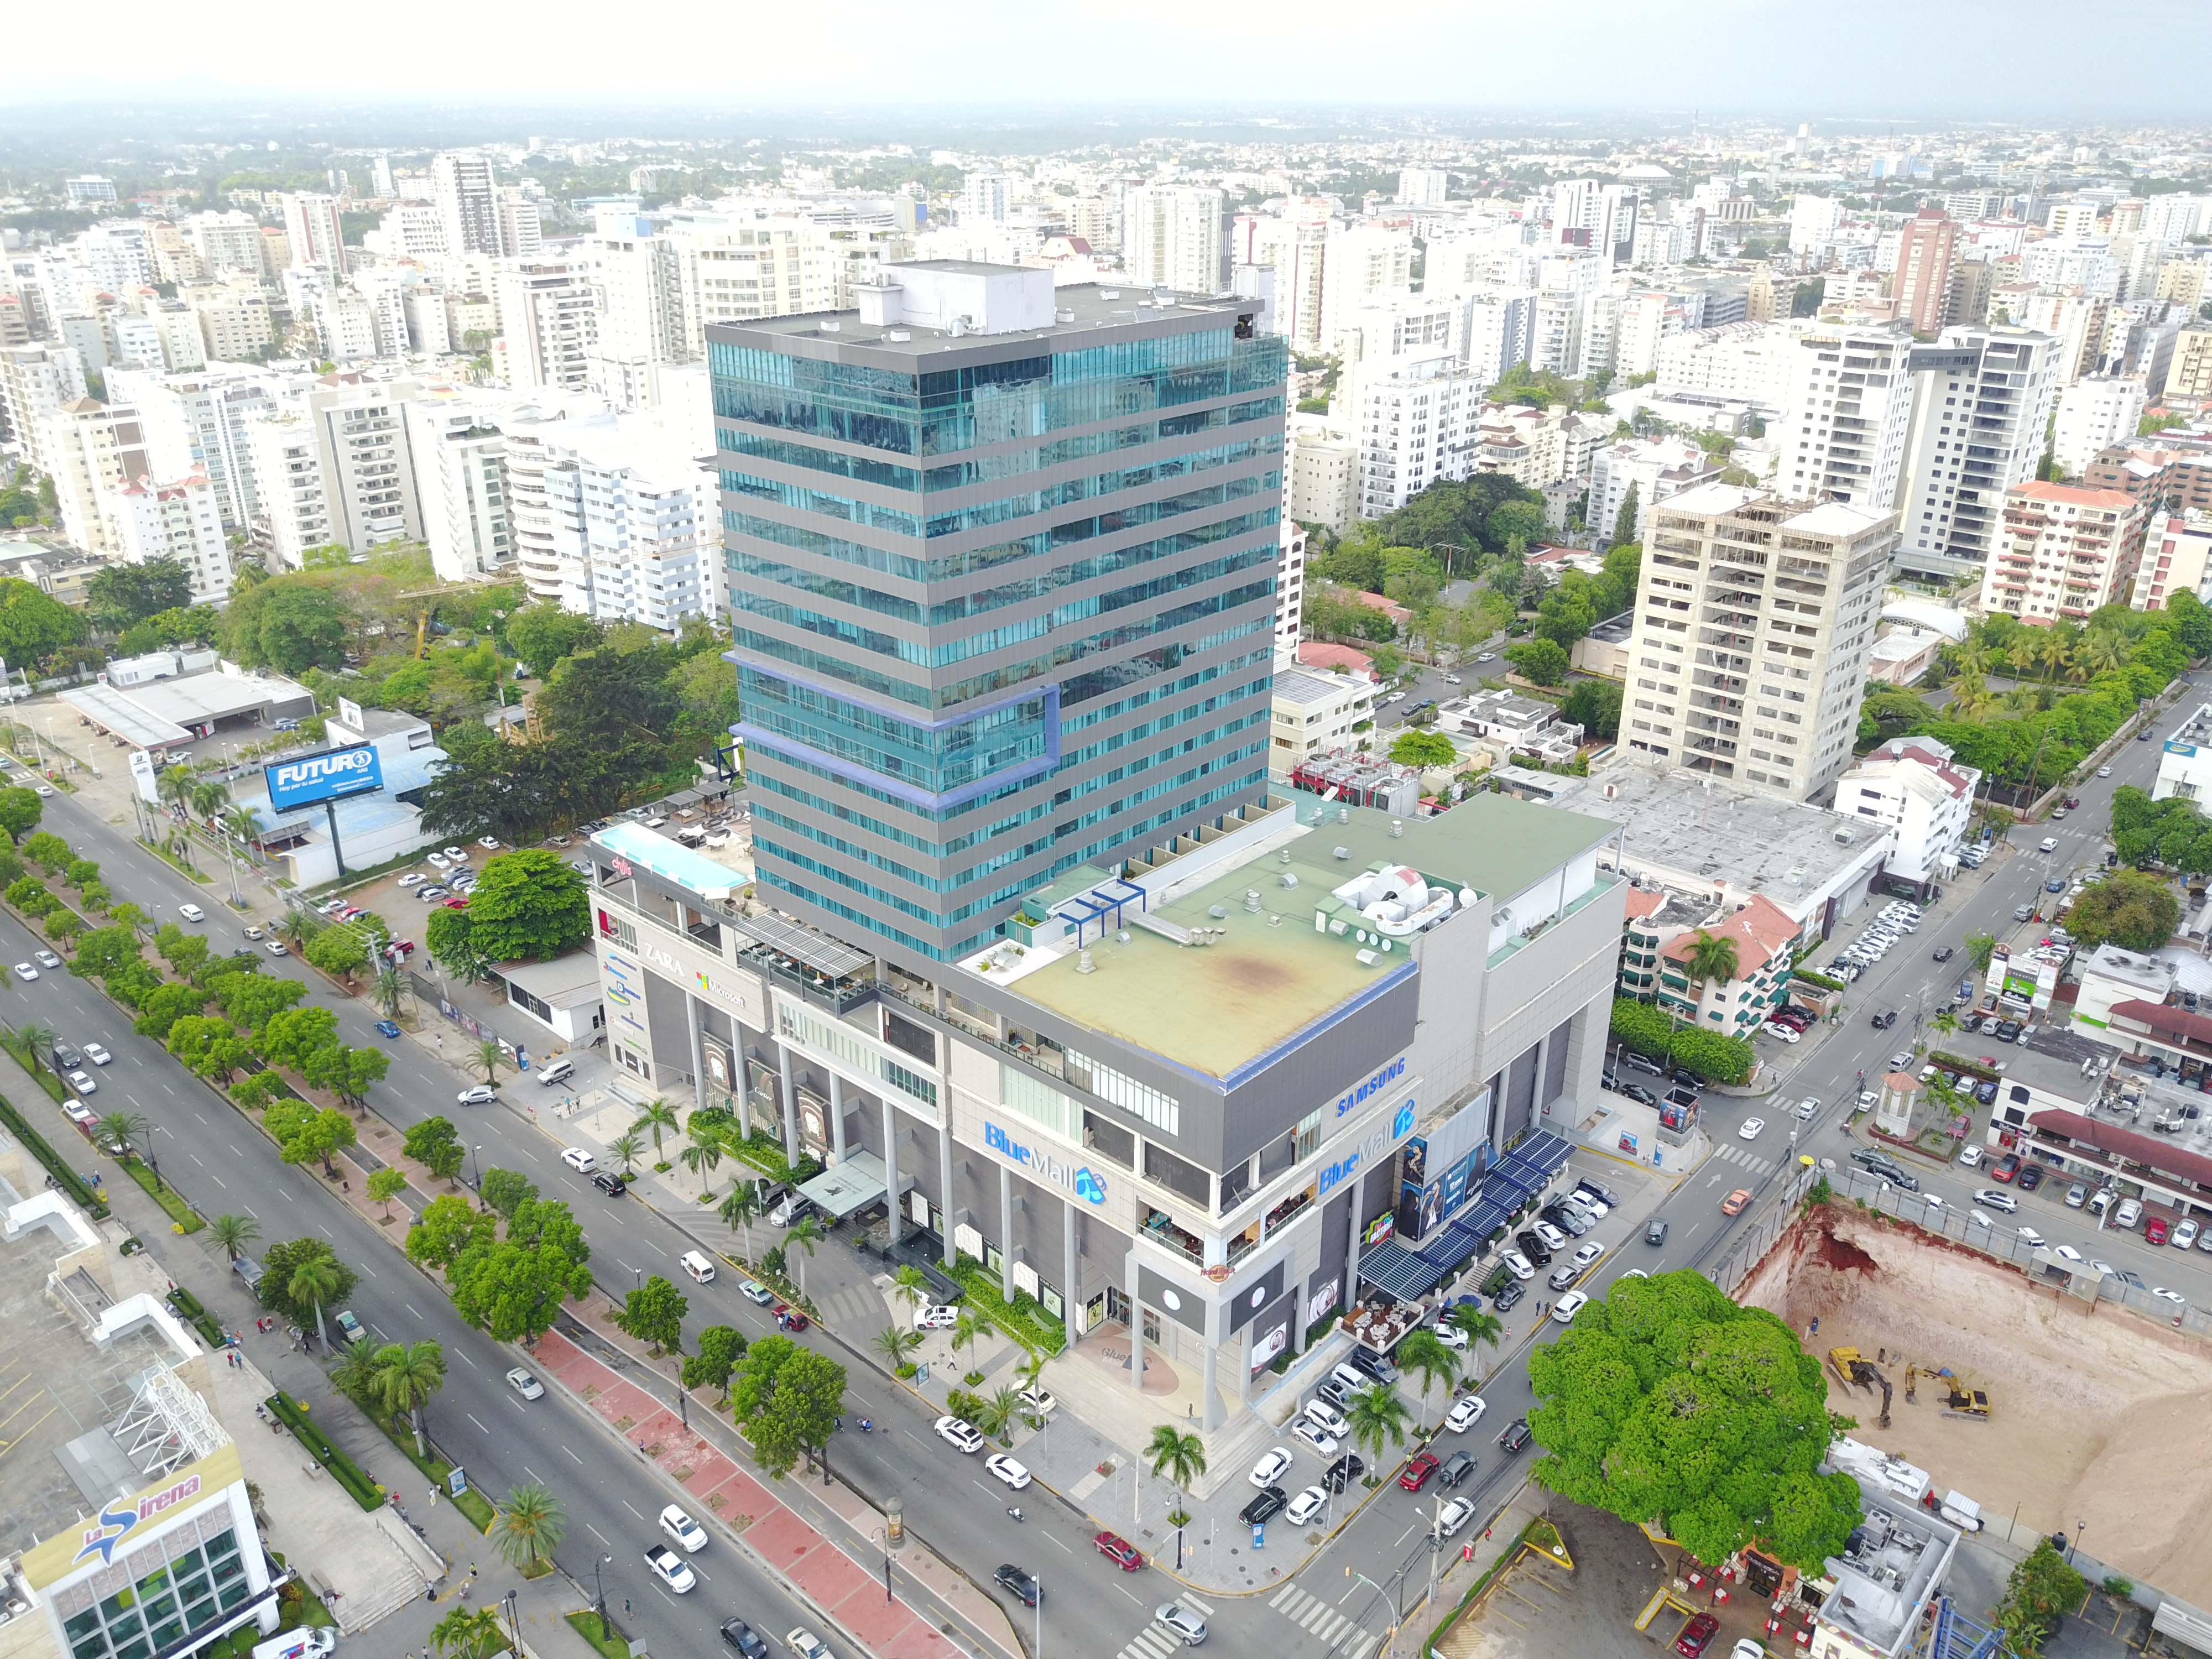 Blue Mall Santo Domingo, located at Av. Winston Churchill is a multilevel building made of metal structures.